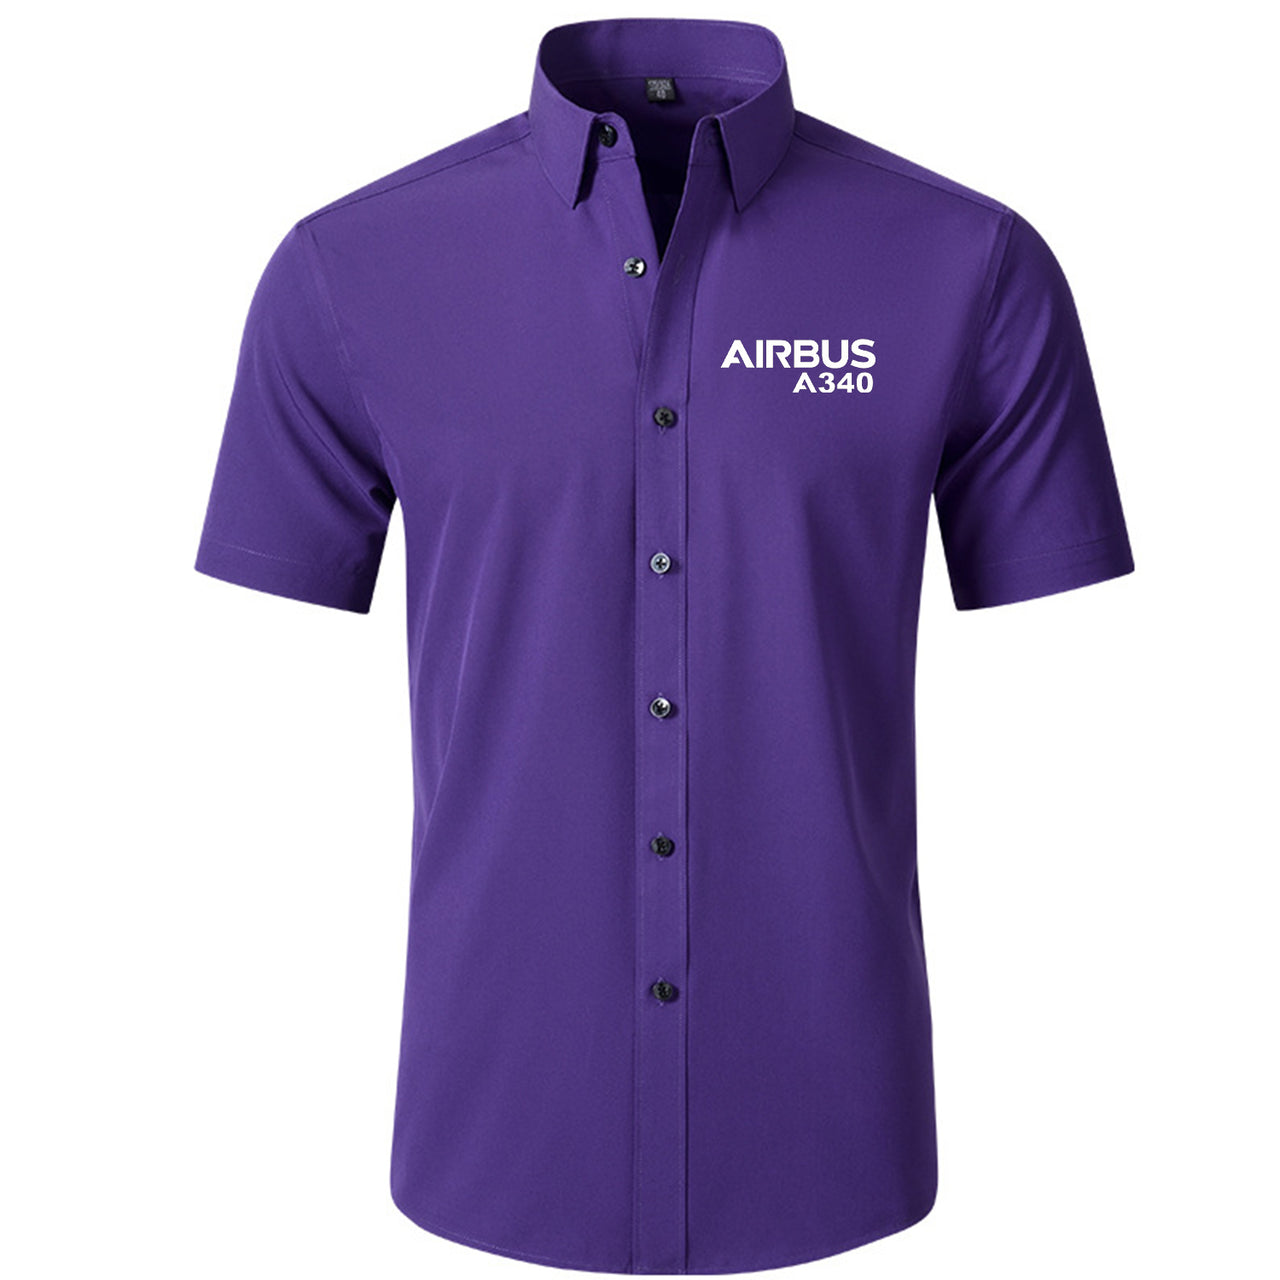 Airbus A340 & Text Designed Short Sleeve Shirts